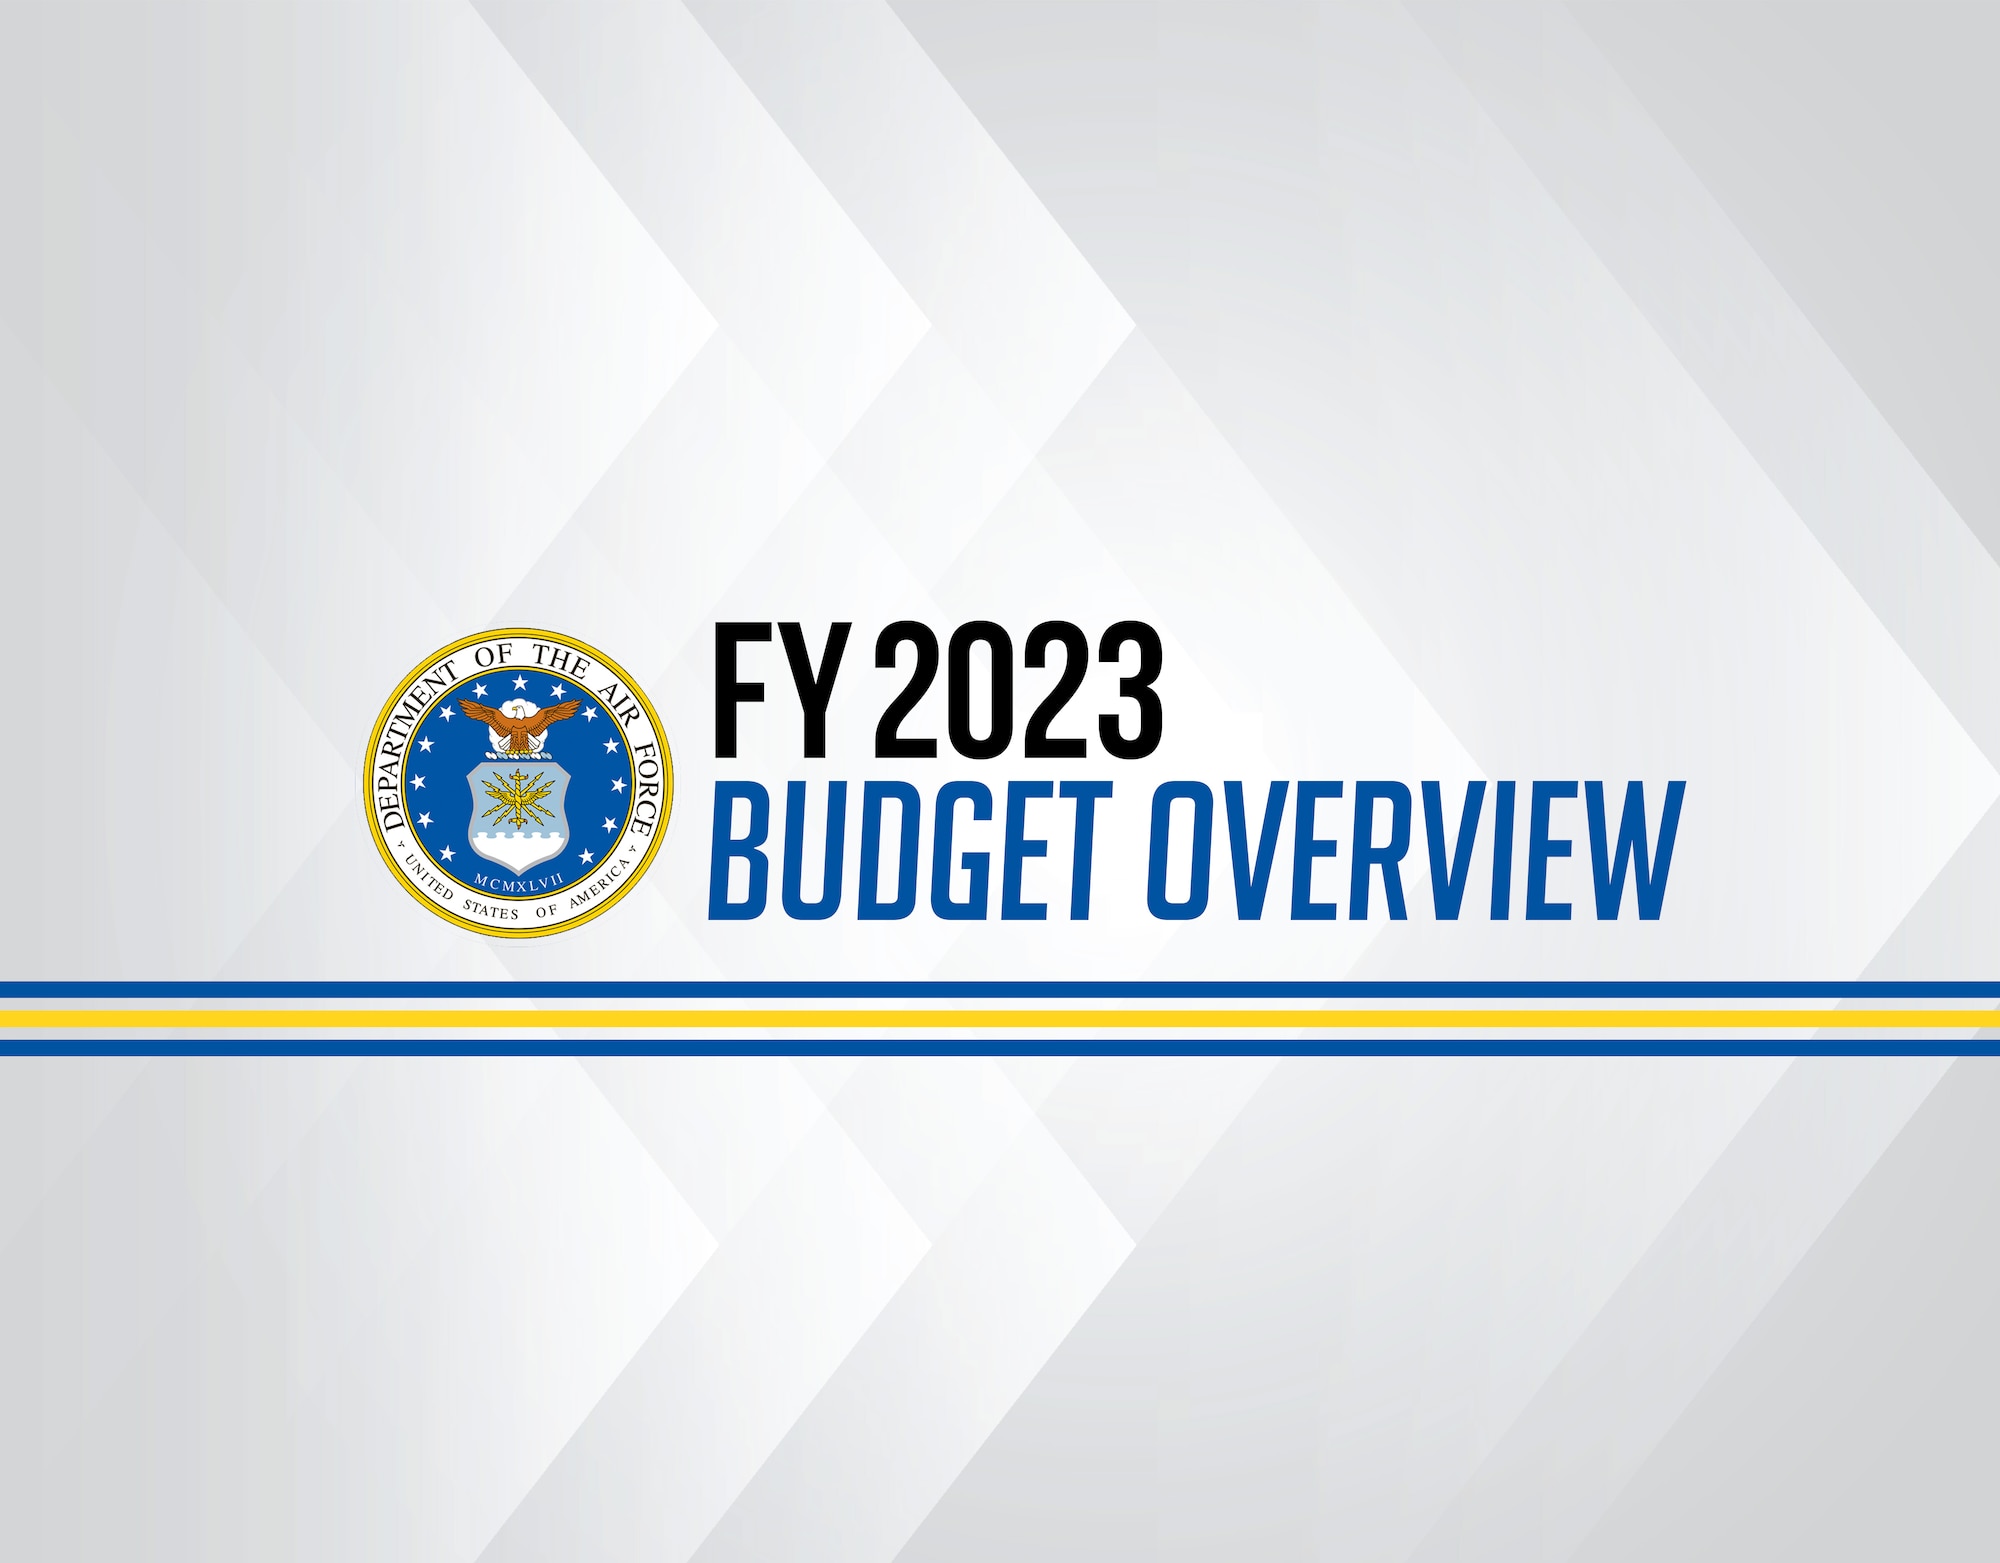 The $194 billion combined budget proposal unveiled March 28, 2022, for the Air Force and Space Force carries a significant boost in spending that senior leaders say is essential to modernizing the services to better confront China and an array of national security threats worldwide. (U.S. Air Force graphic)